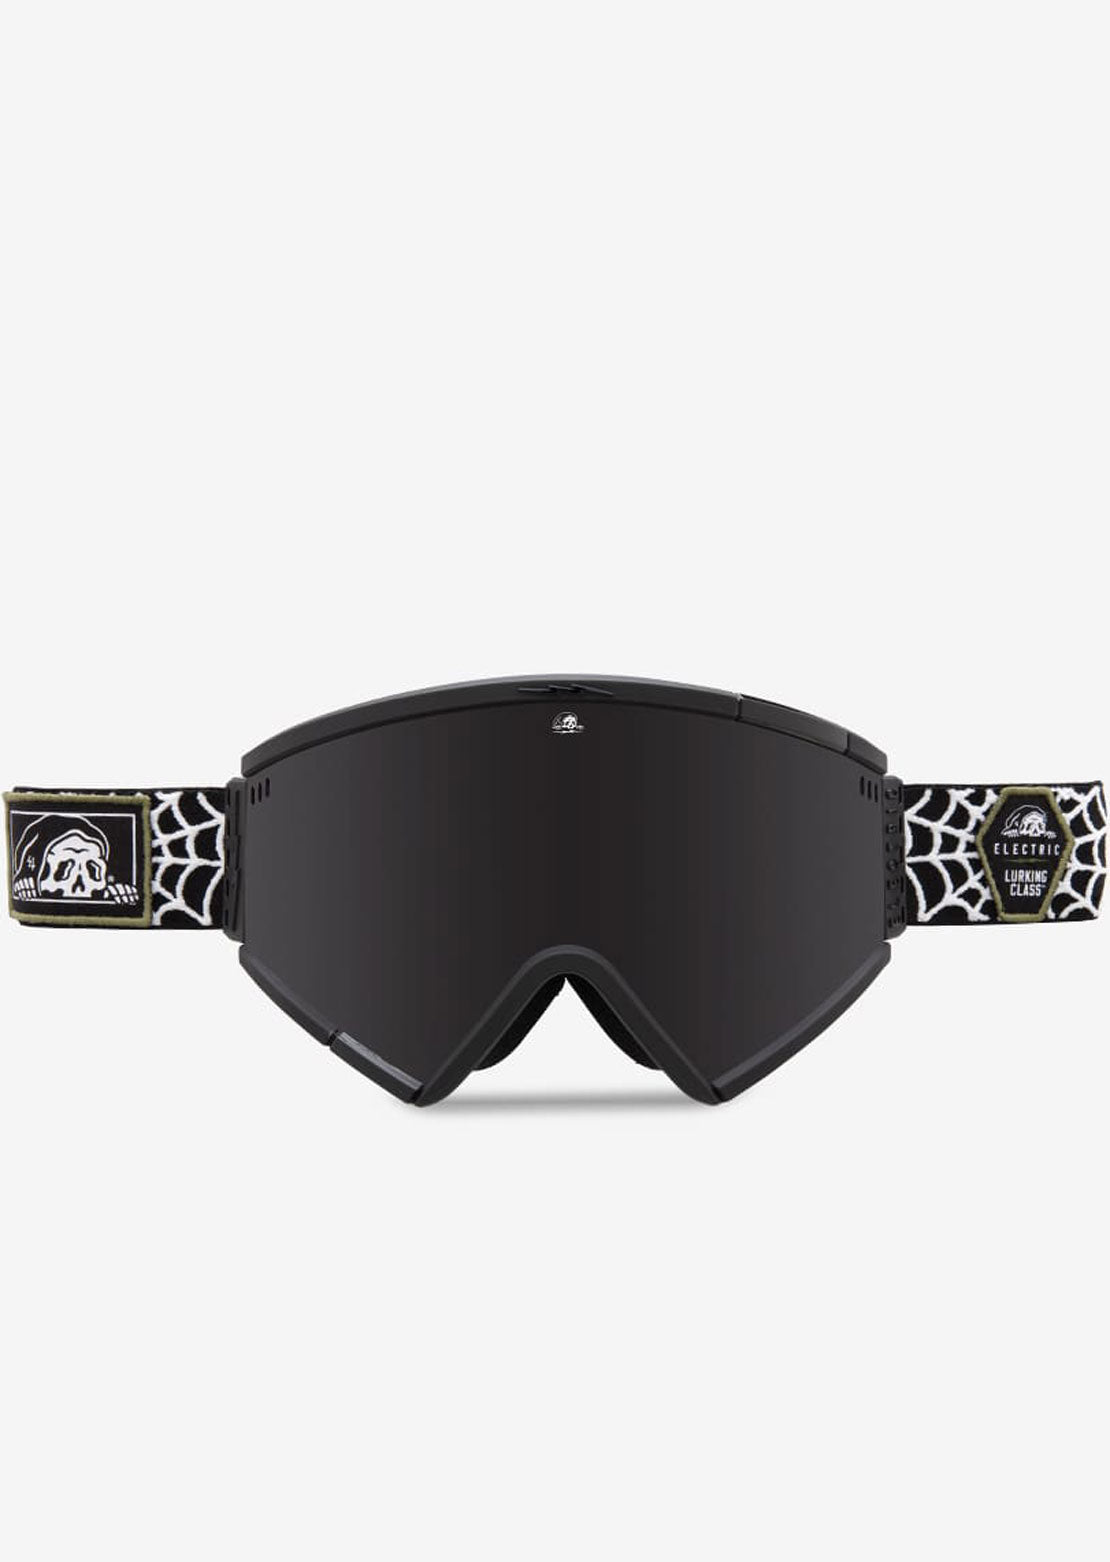 Electric Roteck Snow Goggles Lurking Class Collab/Onyx